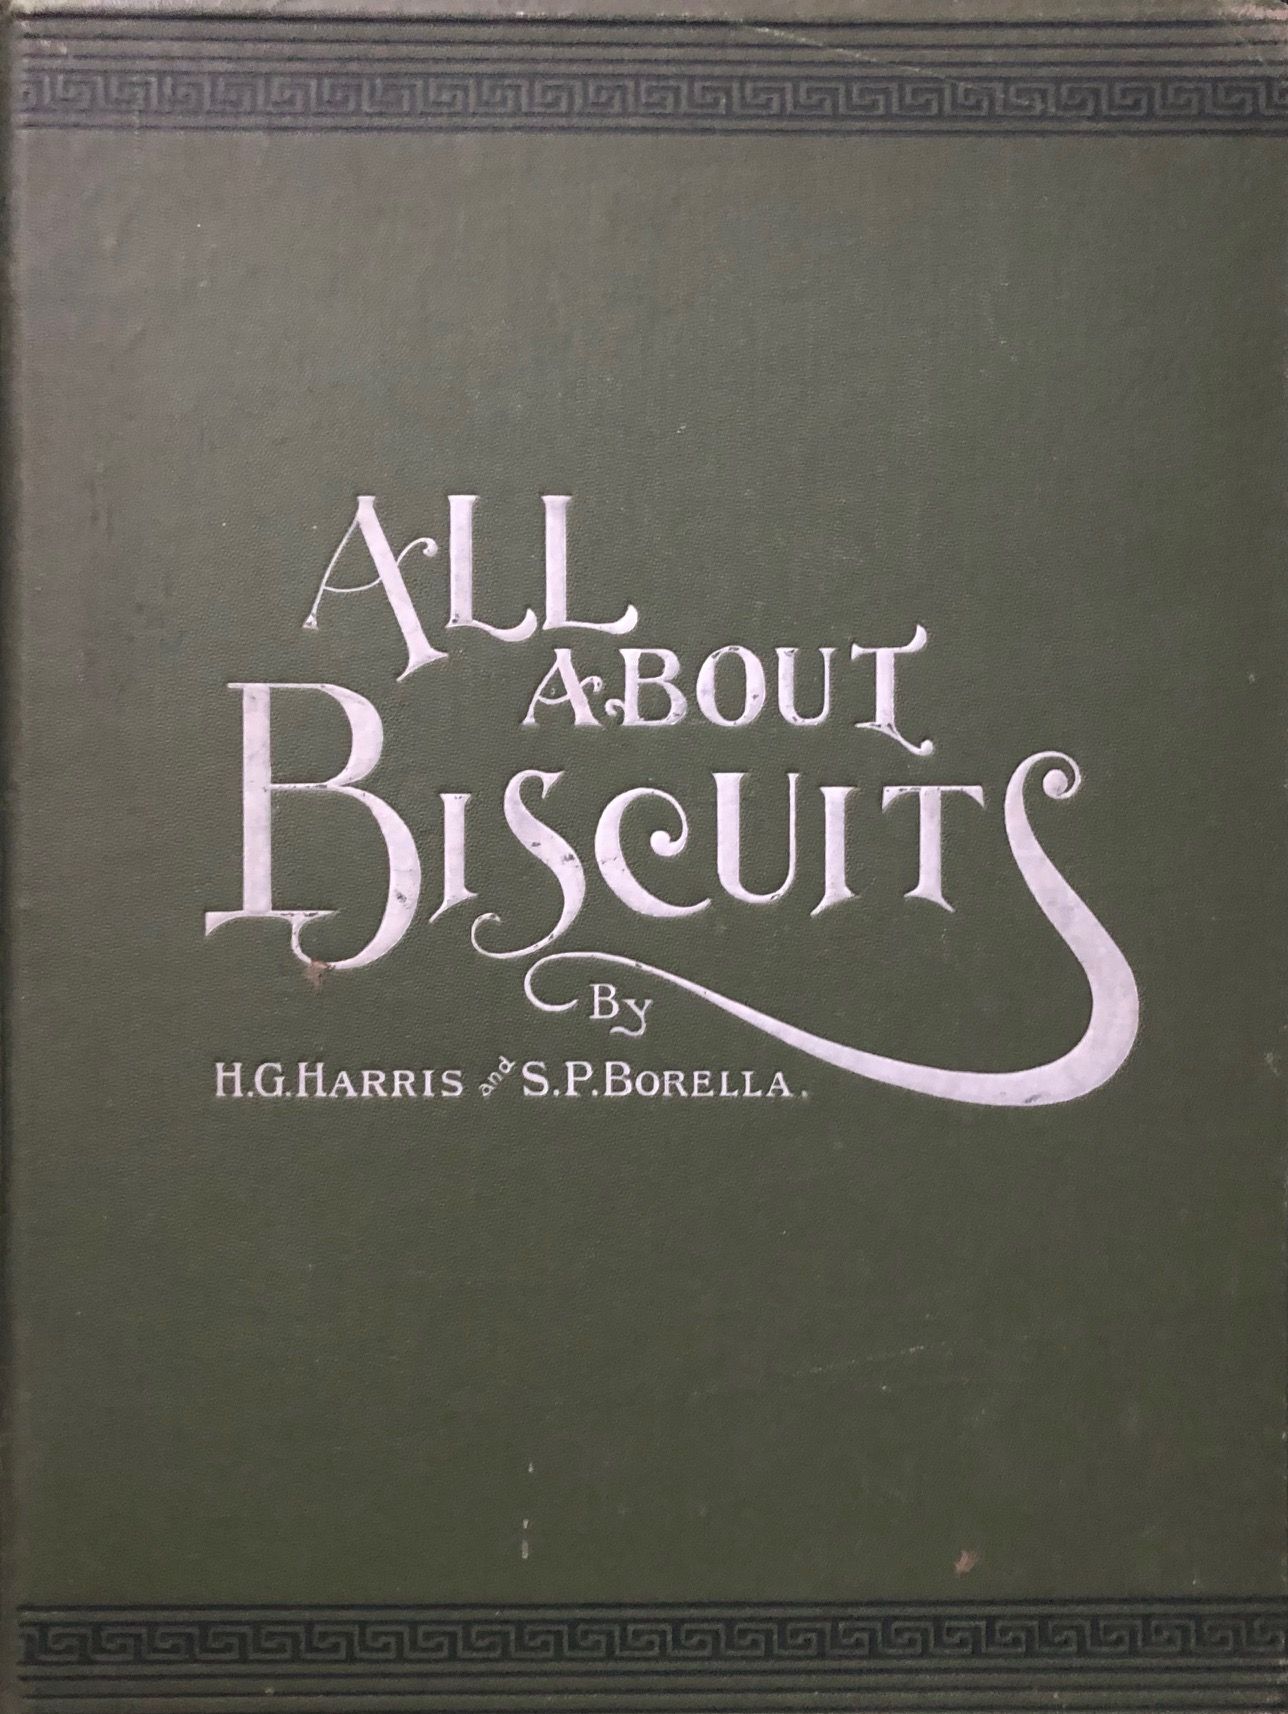 (Confectionery) Harris, H.G. & S.P. Borella. All About Biscuits